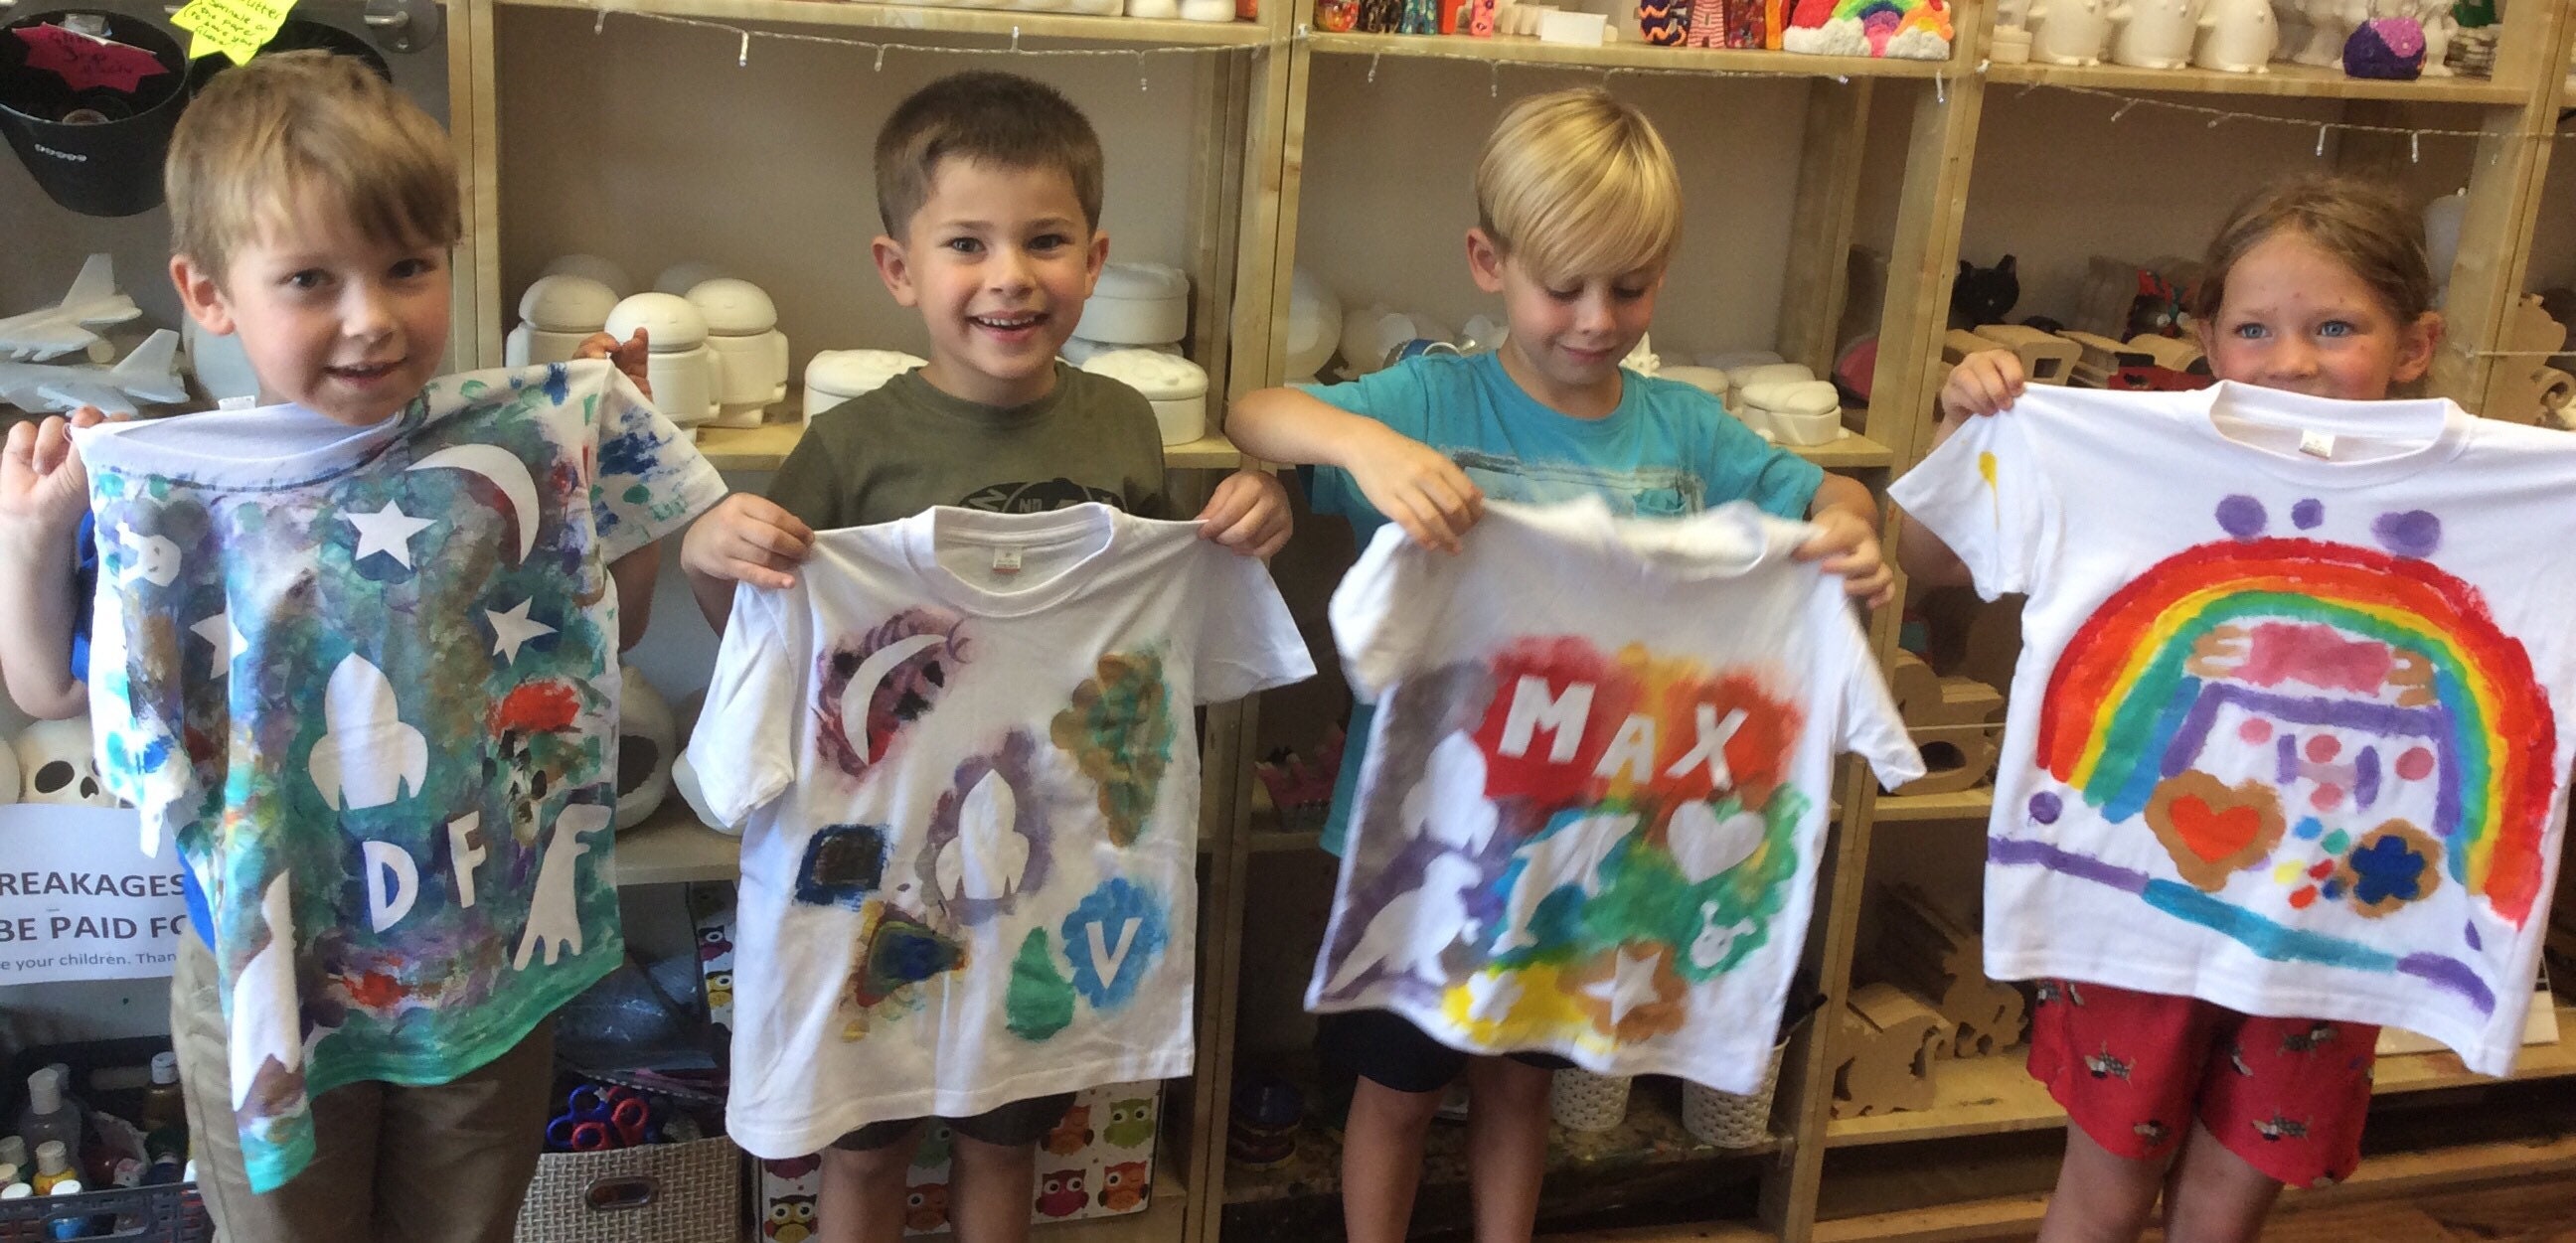 Children's hand-painted gifts,Design a T Shirt Kit-Rainbow Crafts